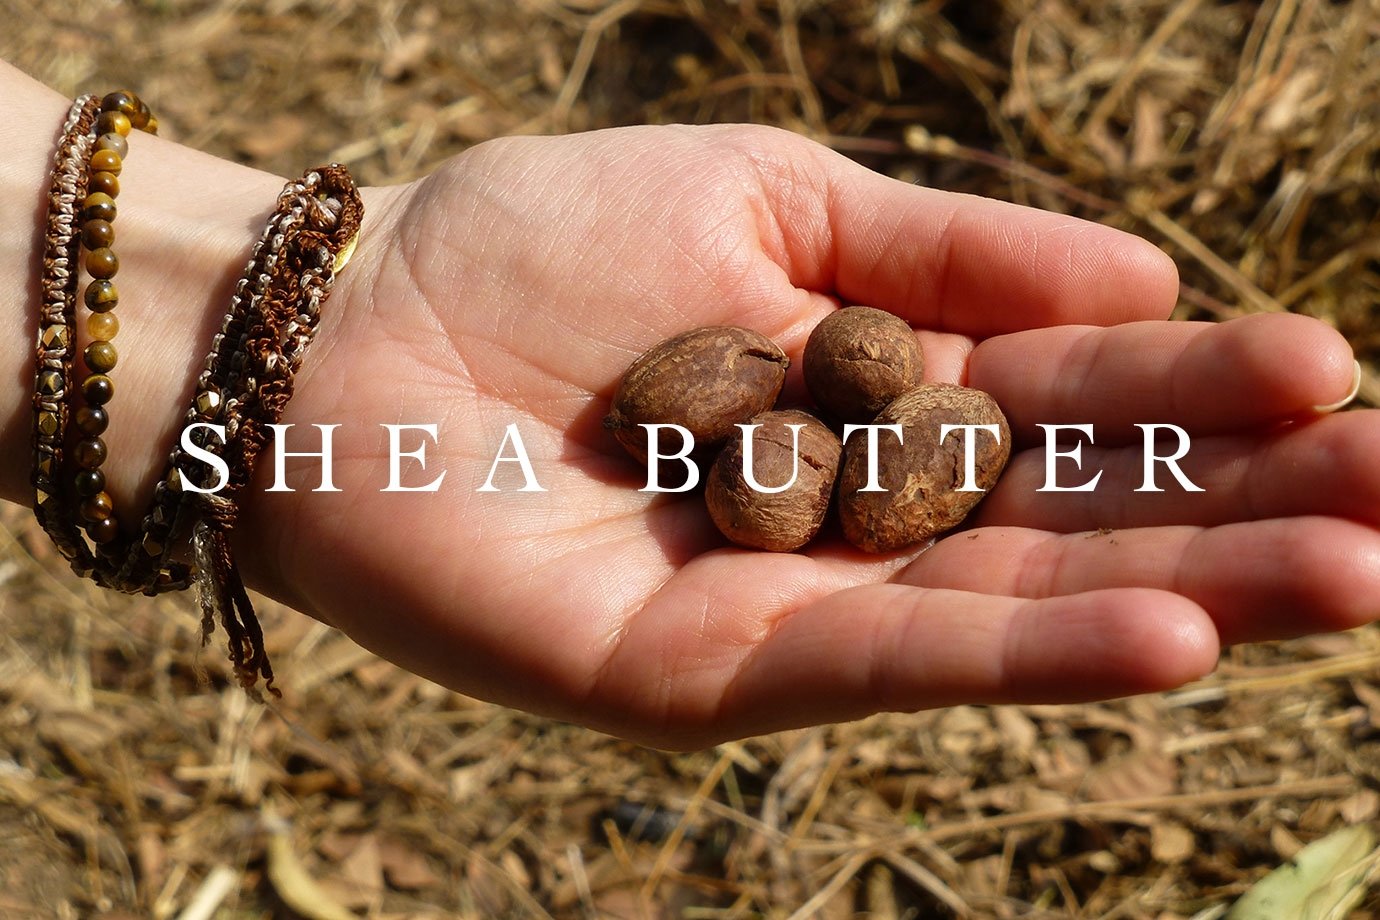 shea nut used for moroccan argan whipped body moisturizer